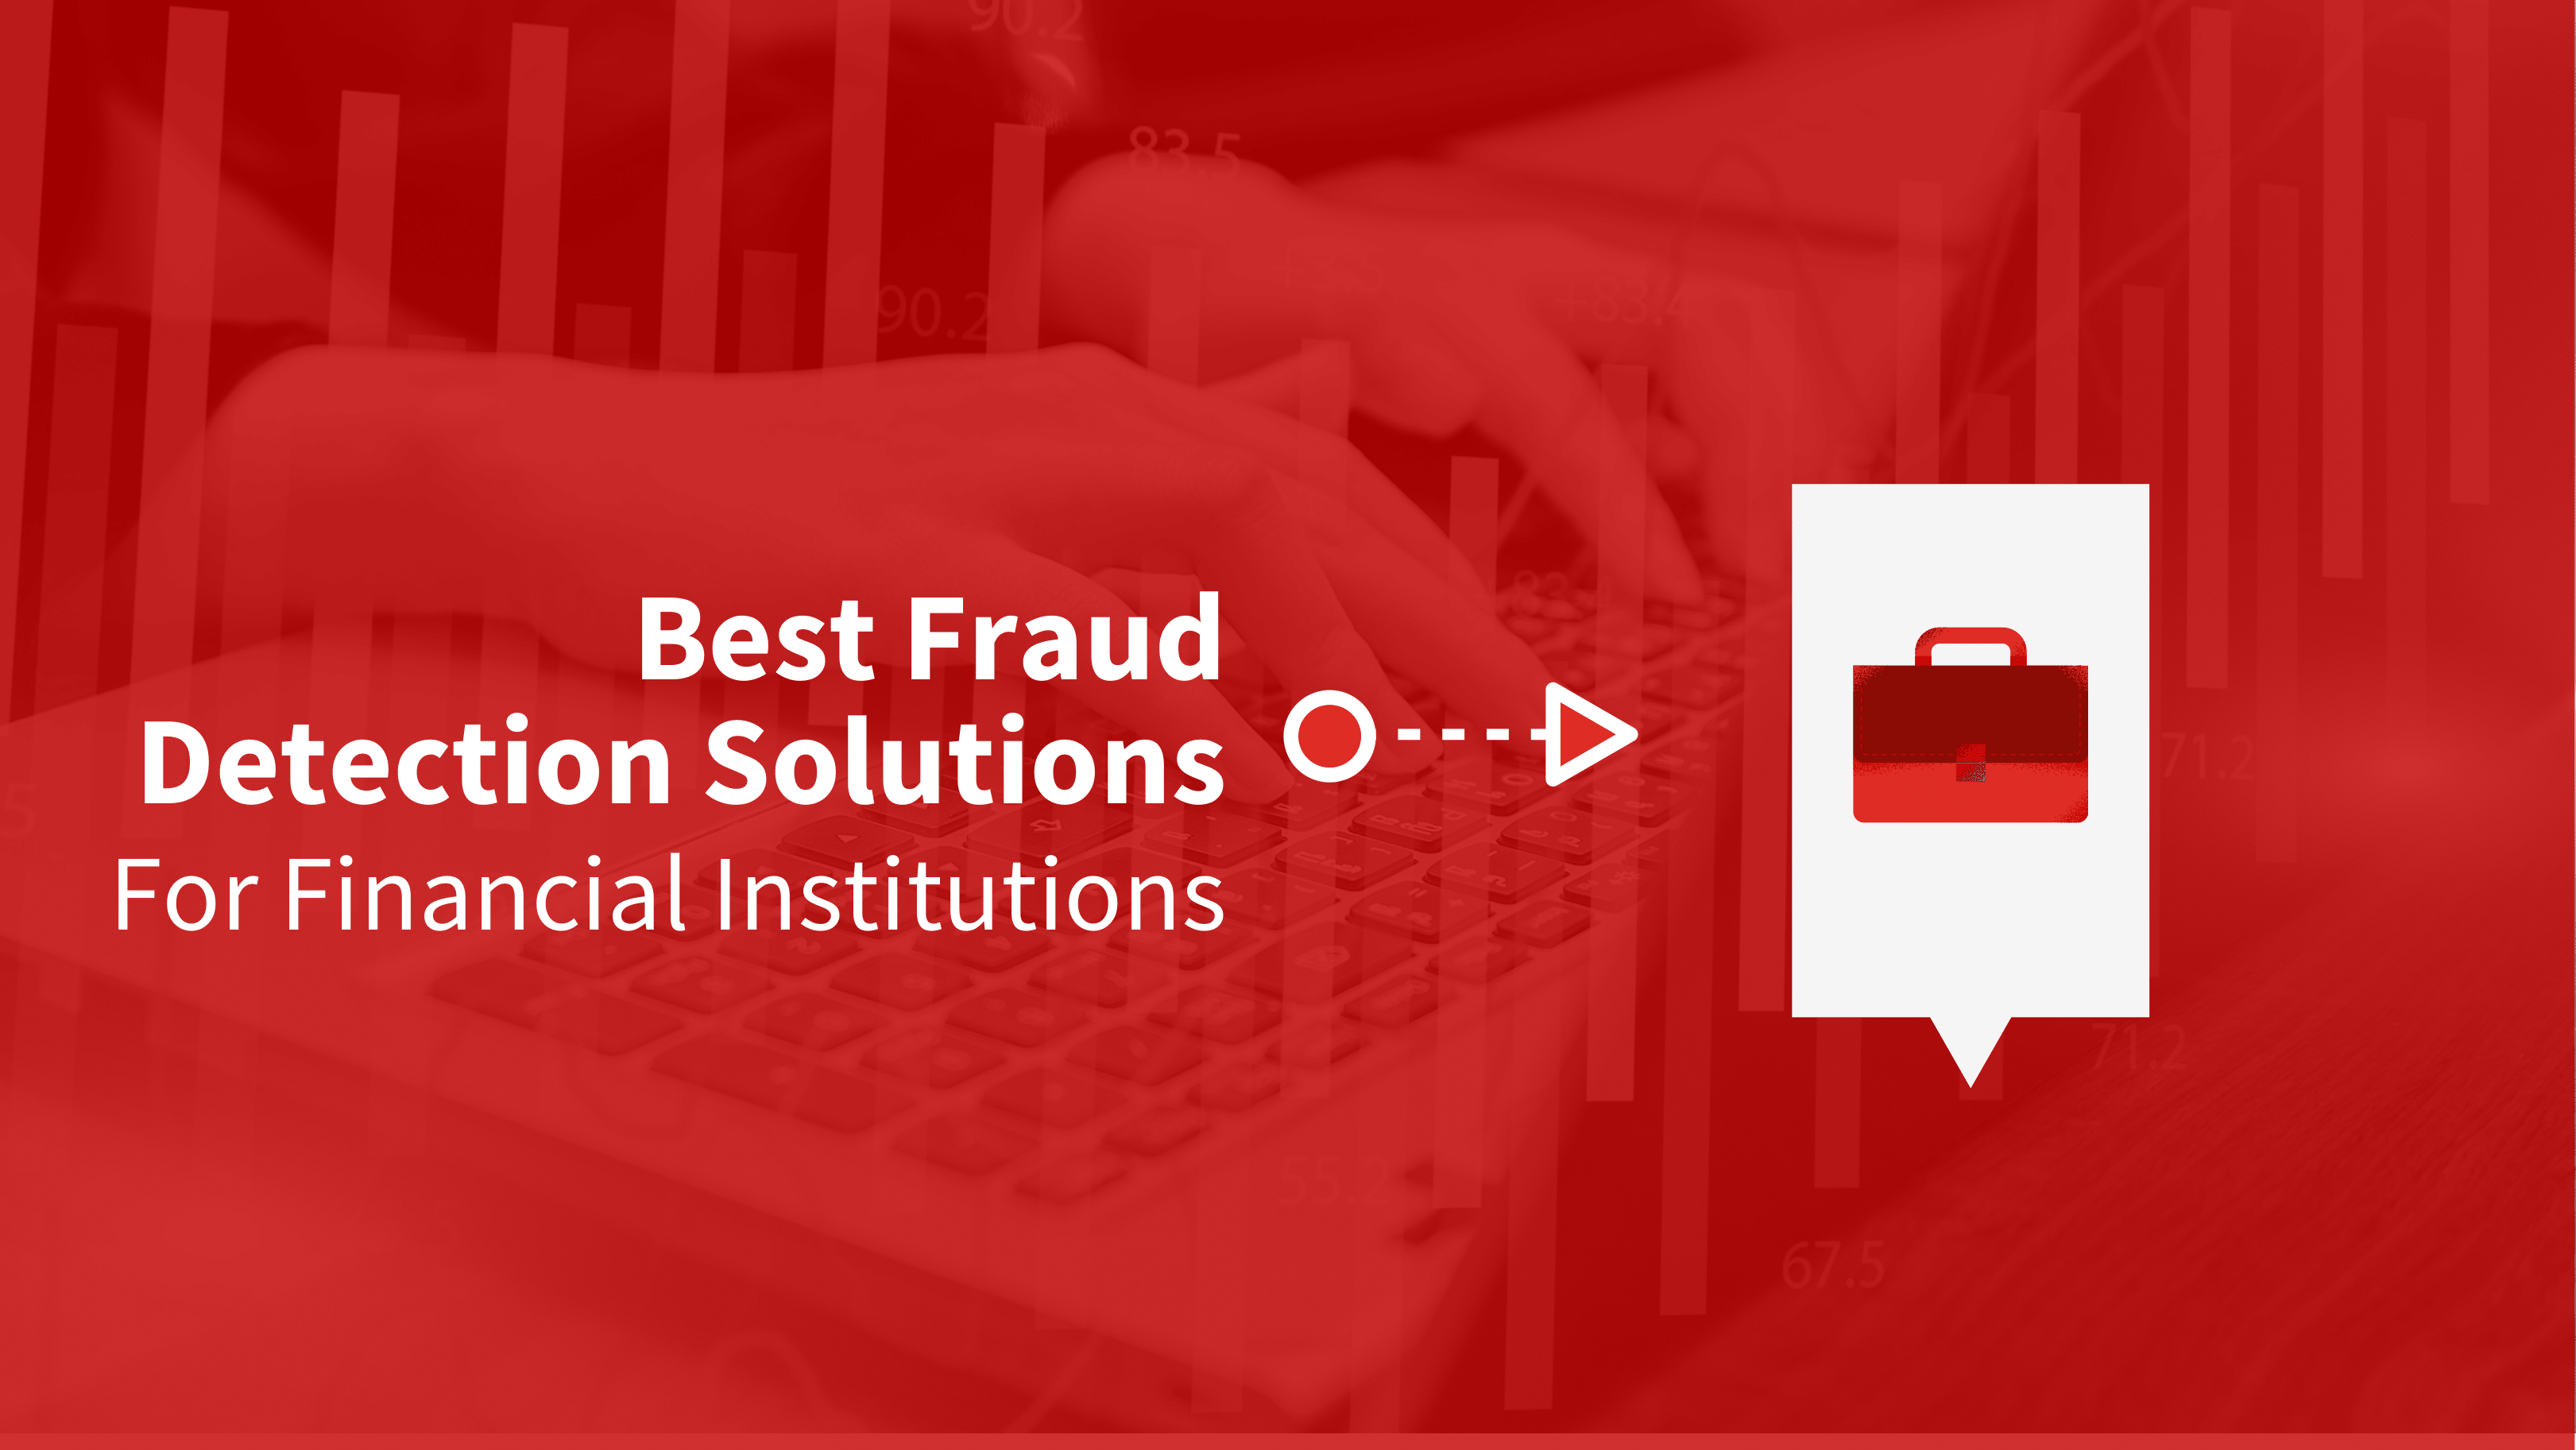 Red image with the text Best Fraud Detection Solutions for Financial Institutions